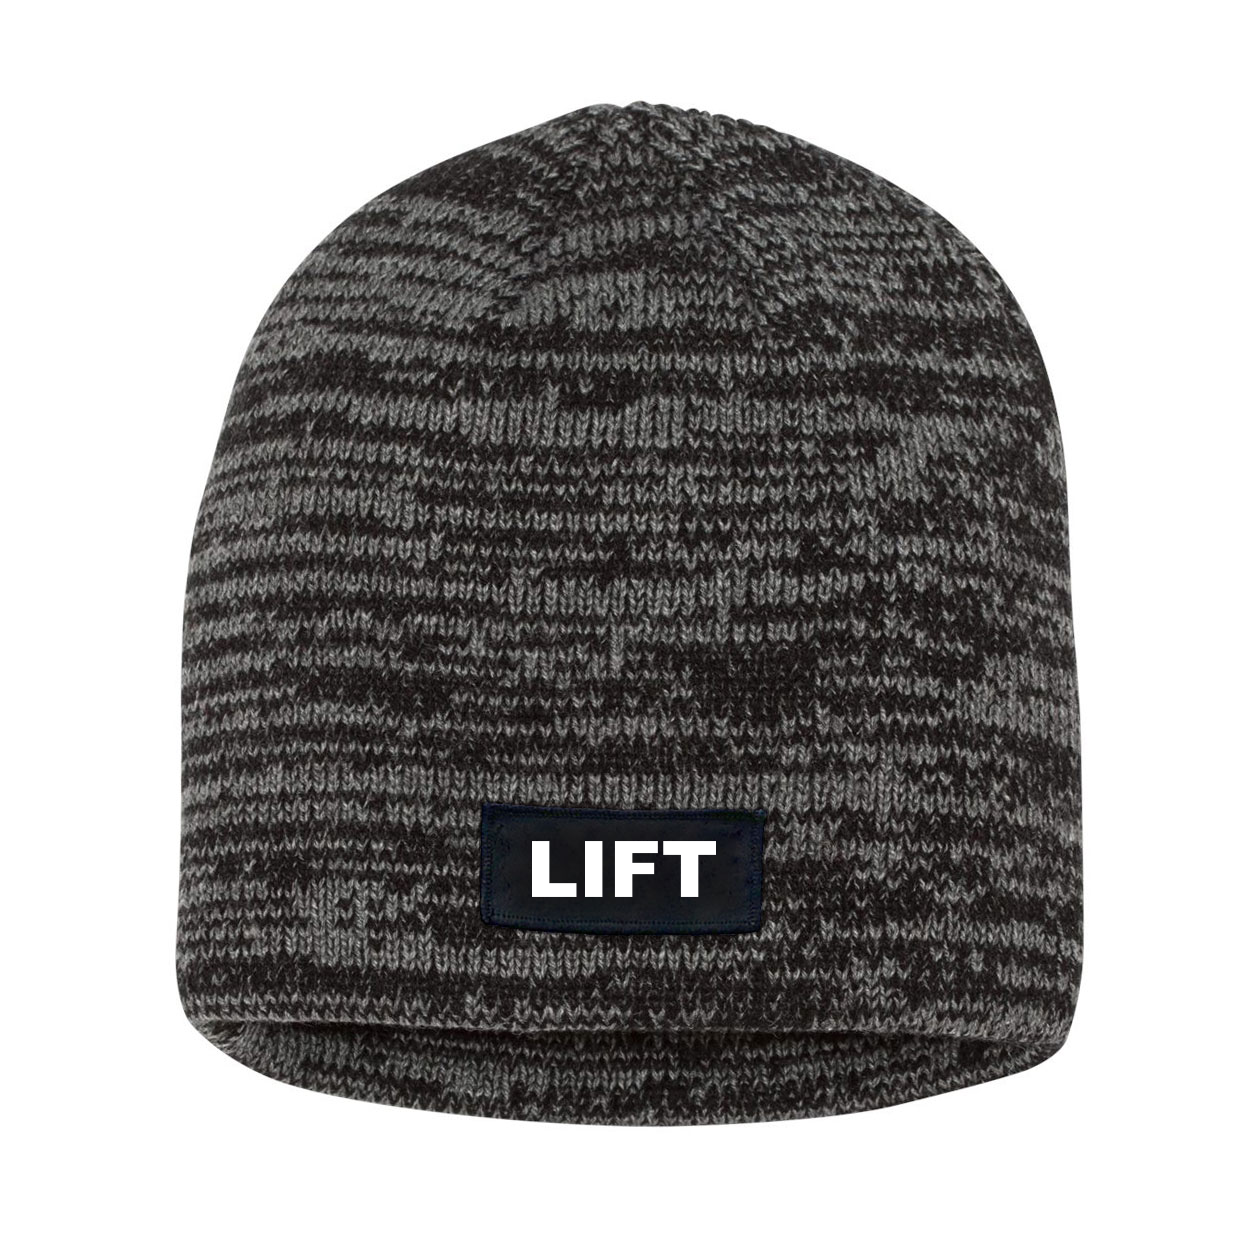 Lift Brand Logo Night Out Woven Patch Skully Marled Knit Beanie Black/Gray